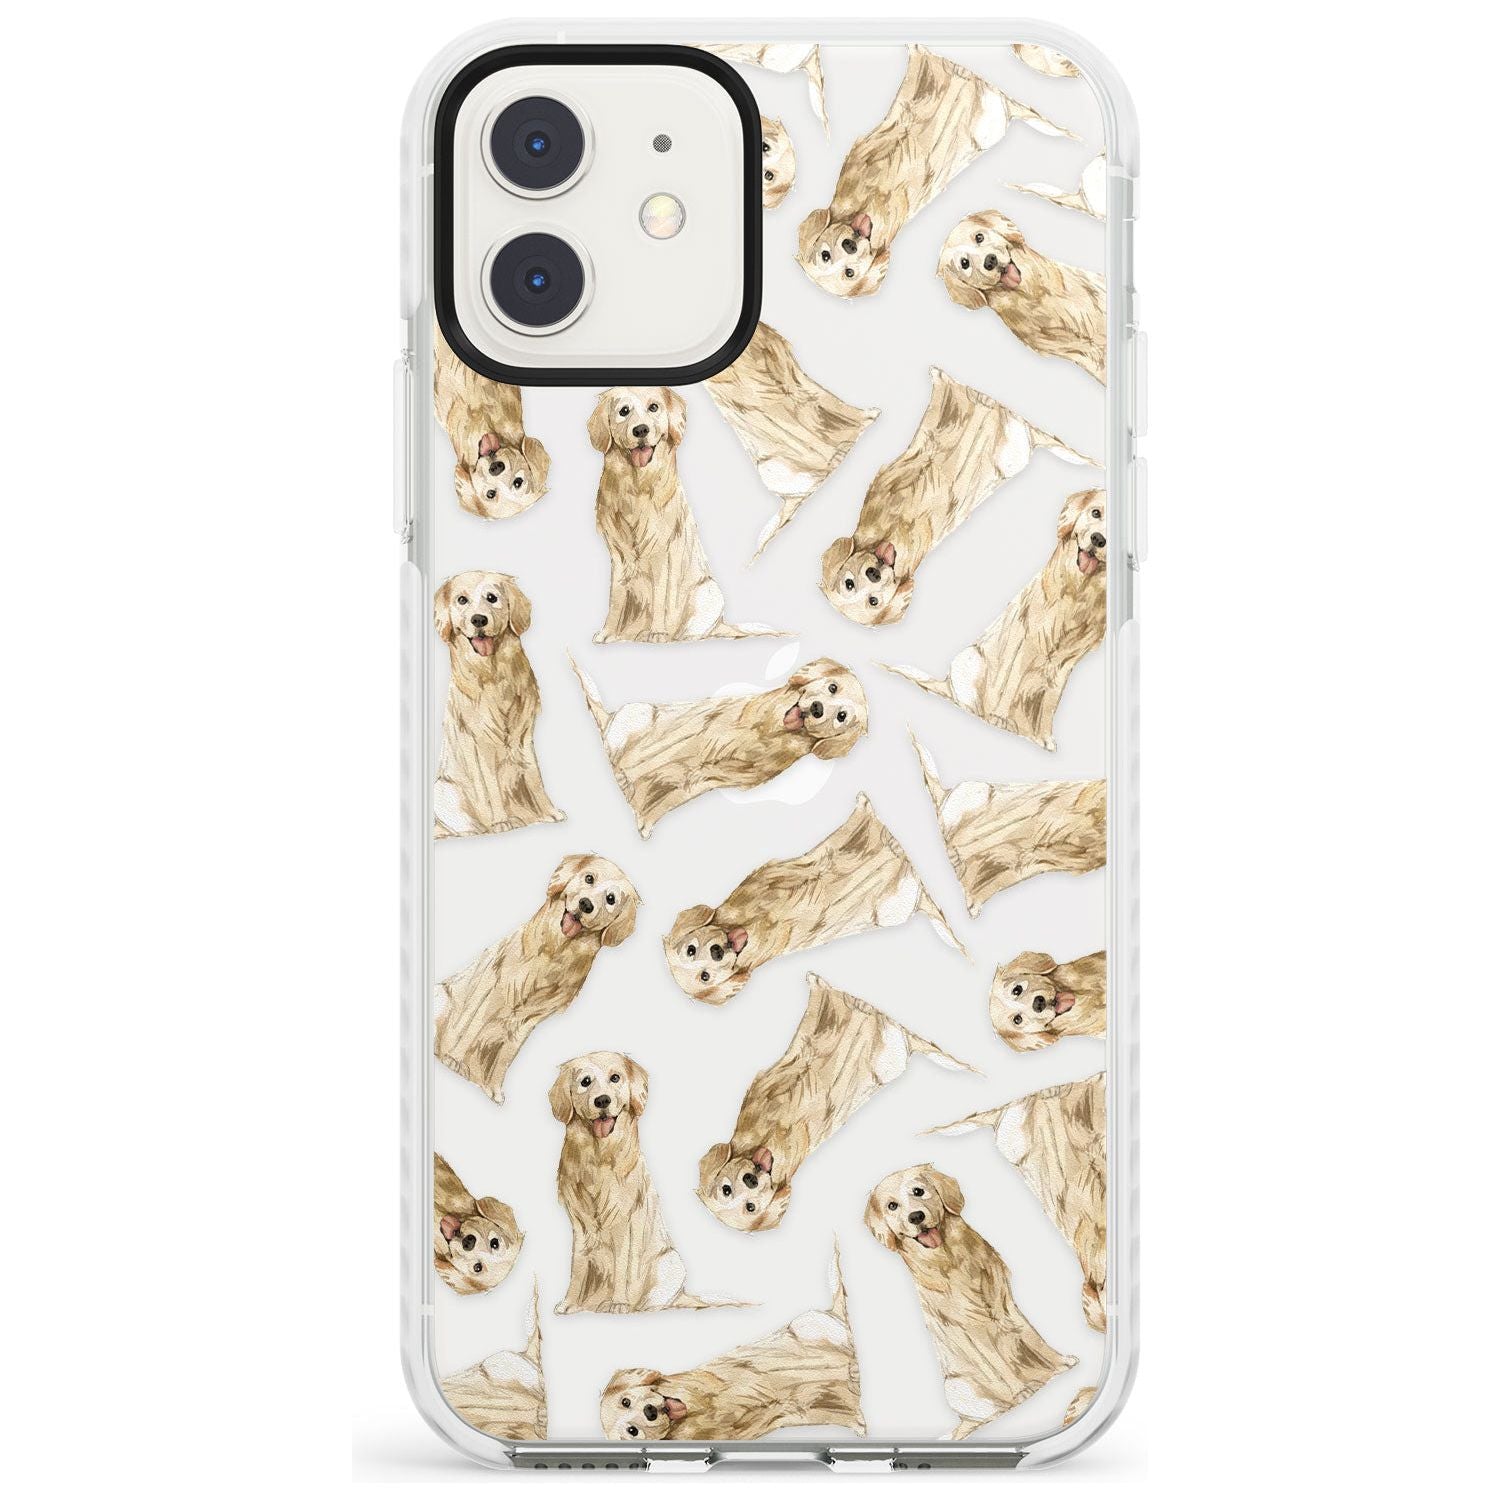 Golden Retriever Watercolour Dog Pattern Impact Phone Case for iPhone 11